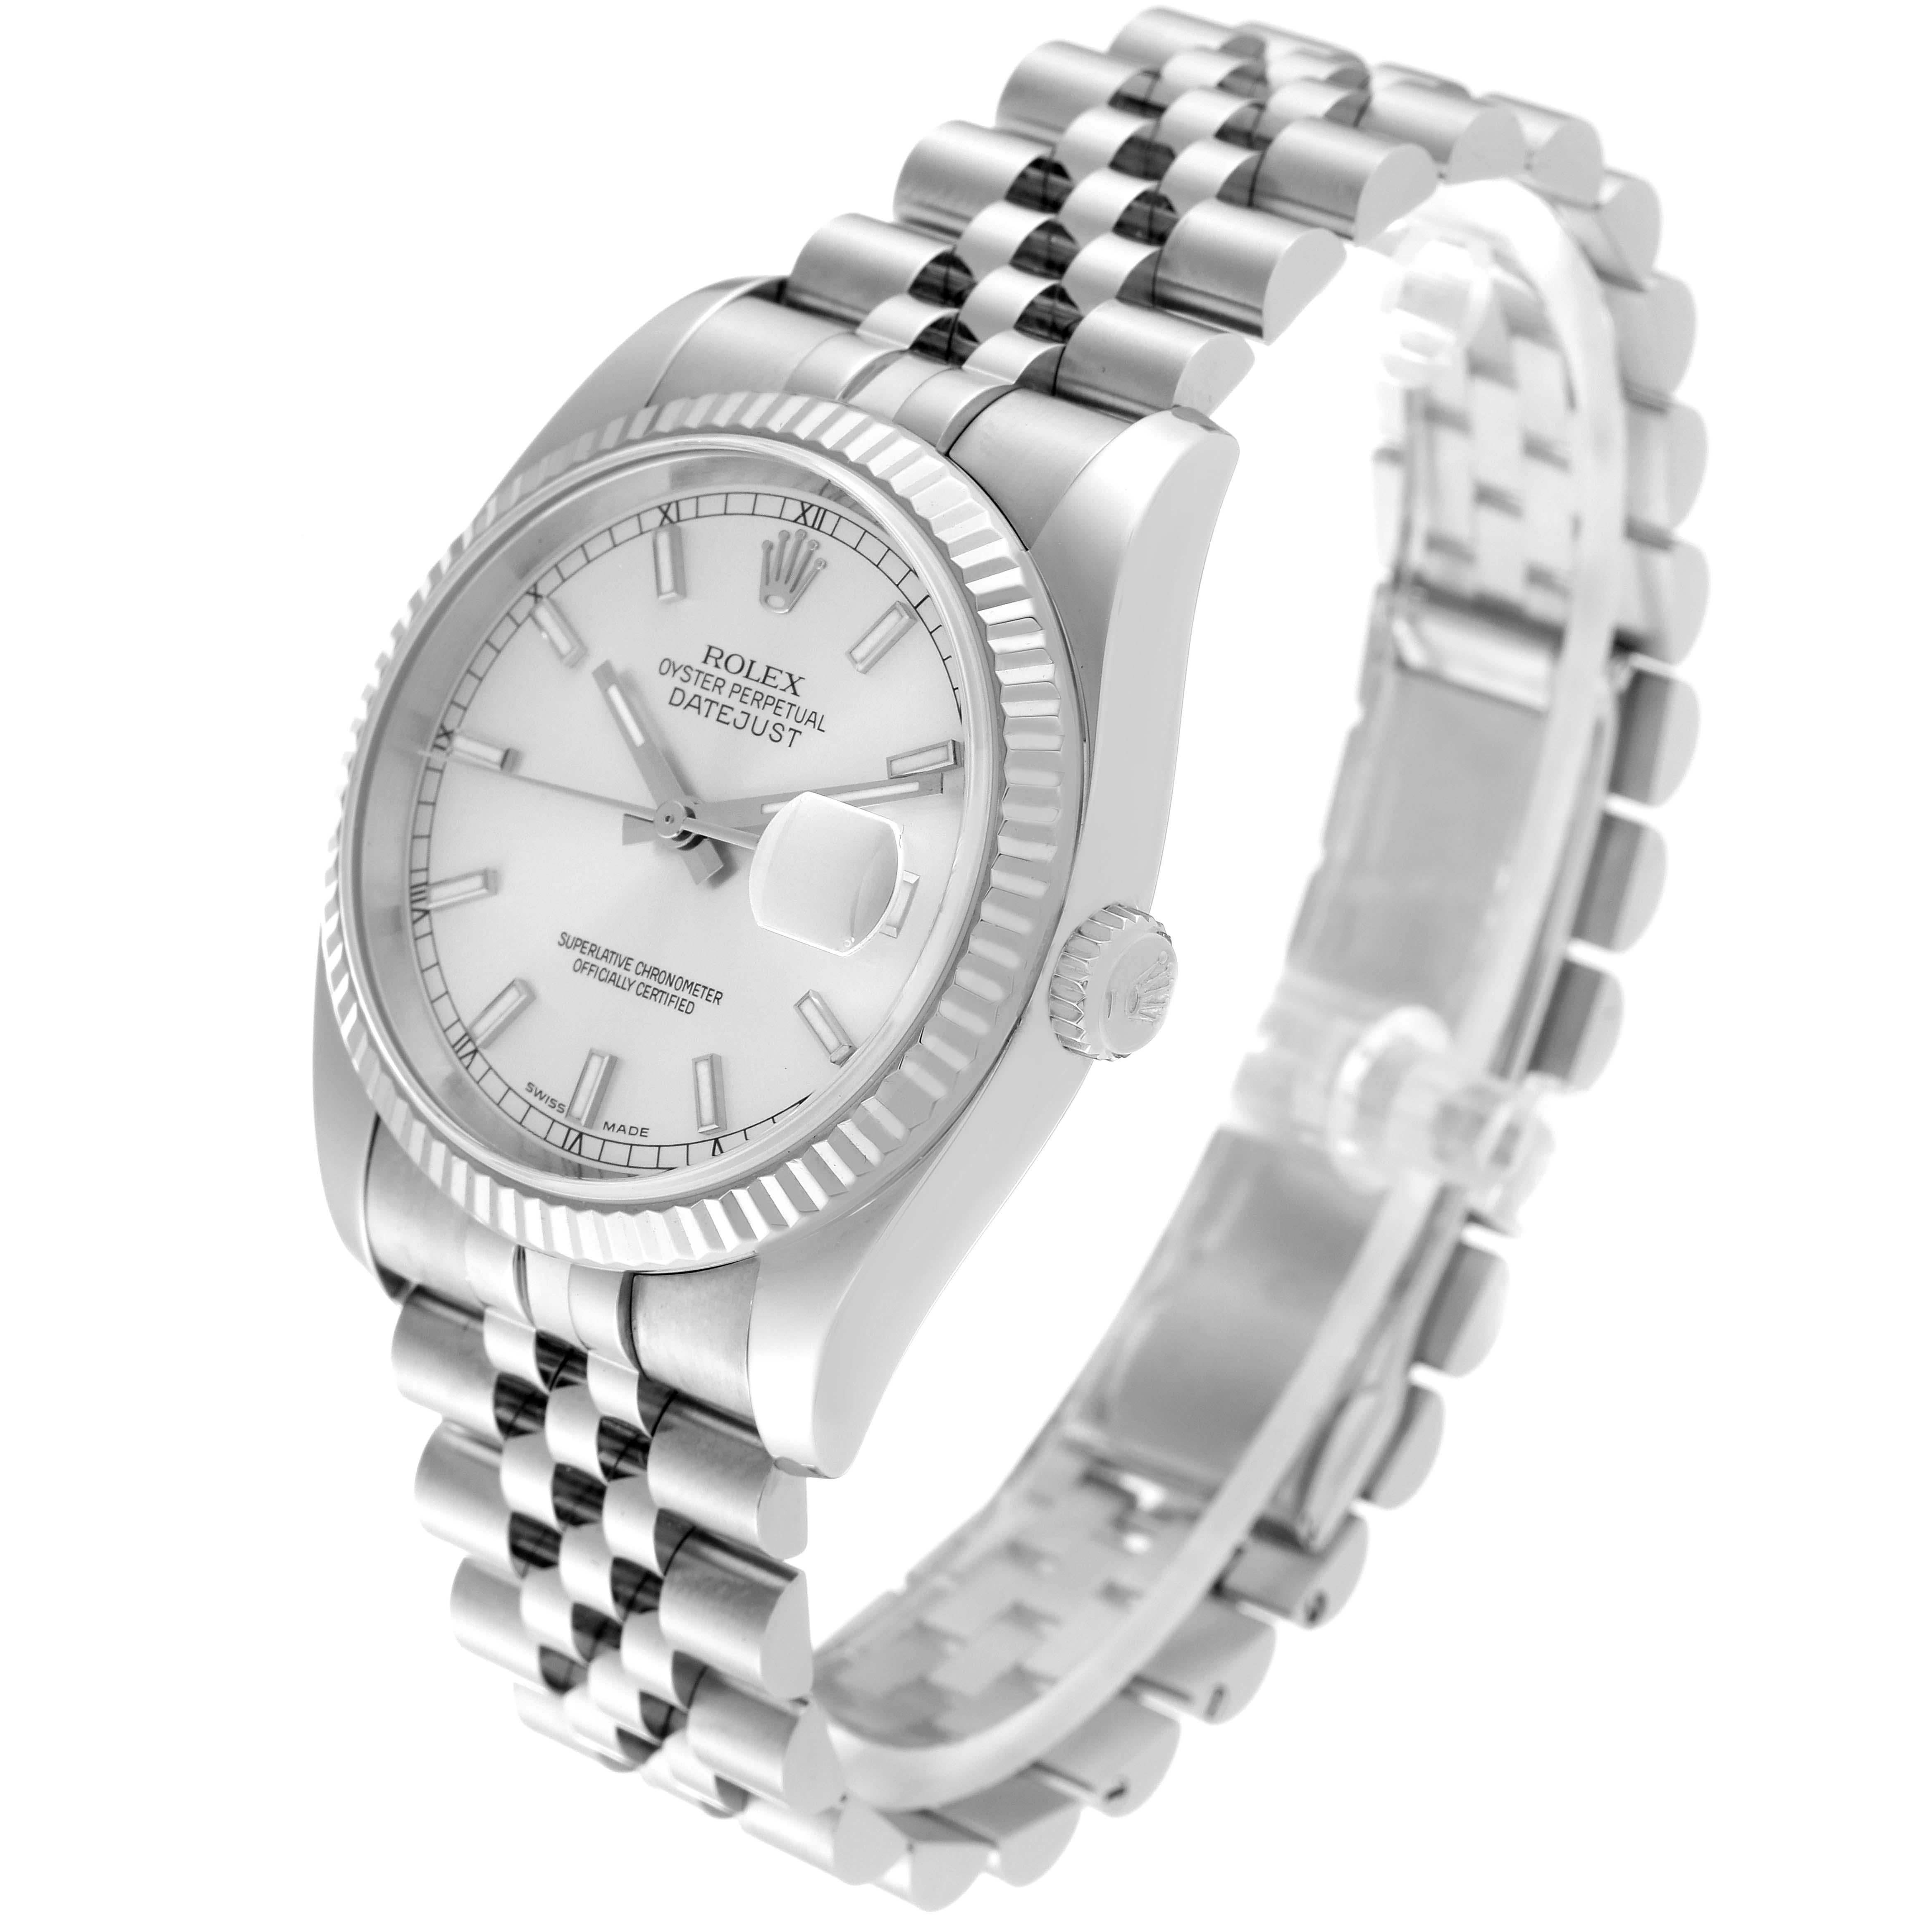 Rolex Datejust Steel White Gold Silver Dial Mens Watch 116234 Box Papers en vente 5